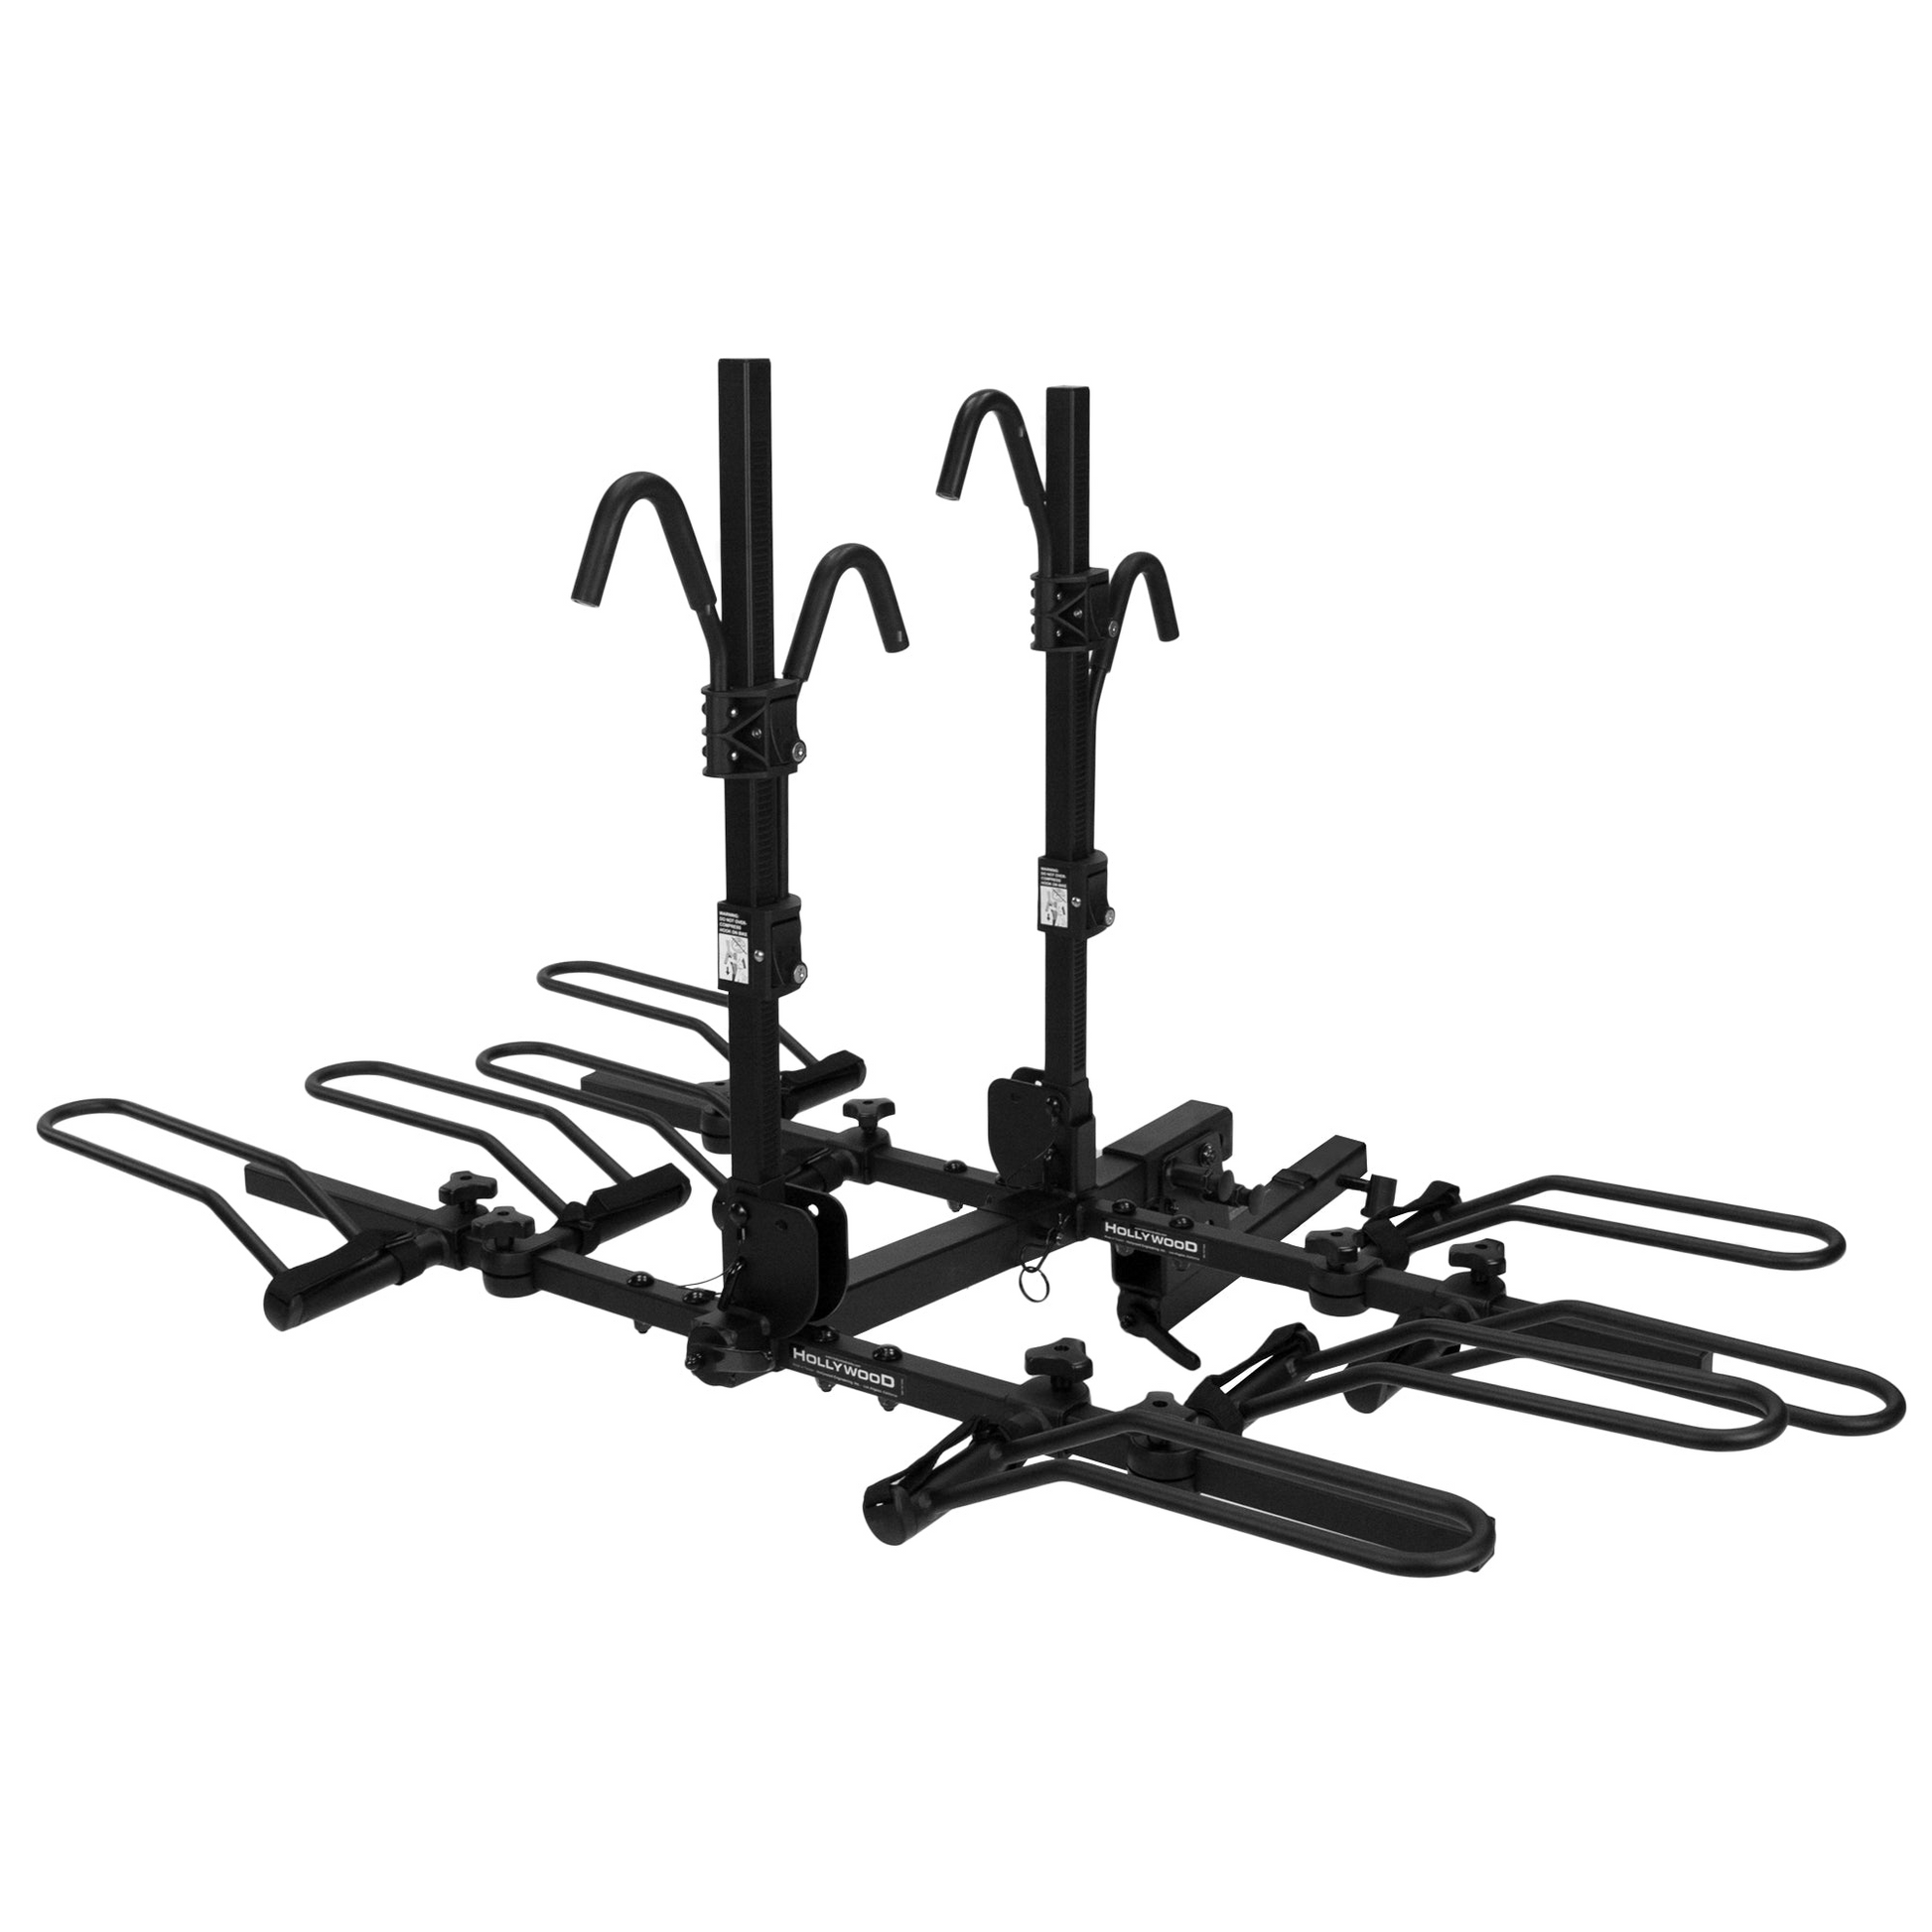 The Hollywood Racks - Sport Rider SE4, a hitch bike rack, features an easy-to-use black design with two handles for convenient use.